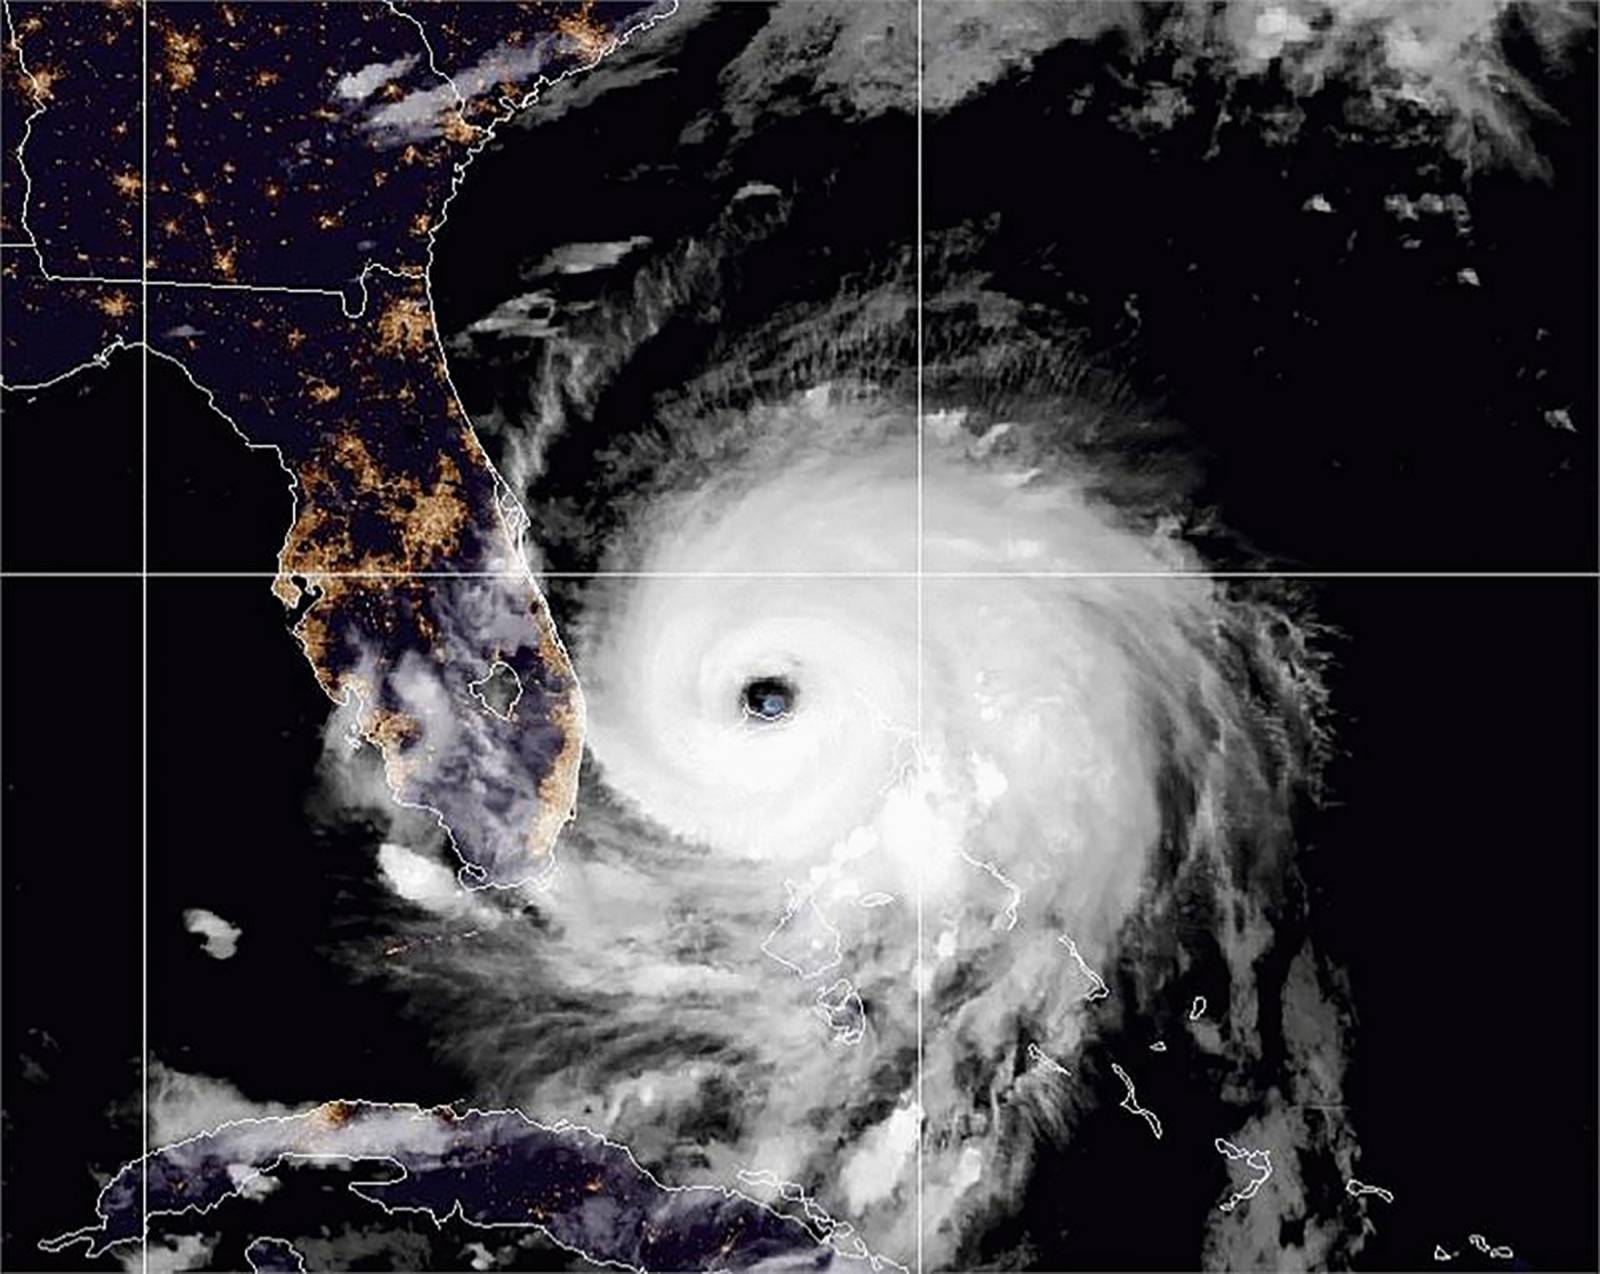 The eye of Hurricane Dorian remains near the city of Freeport, Bahamas in a satellite photograph distributed by the NOAA's National Weather Service